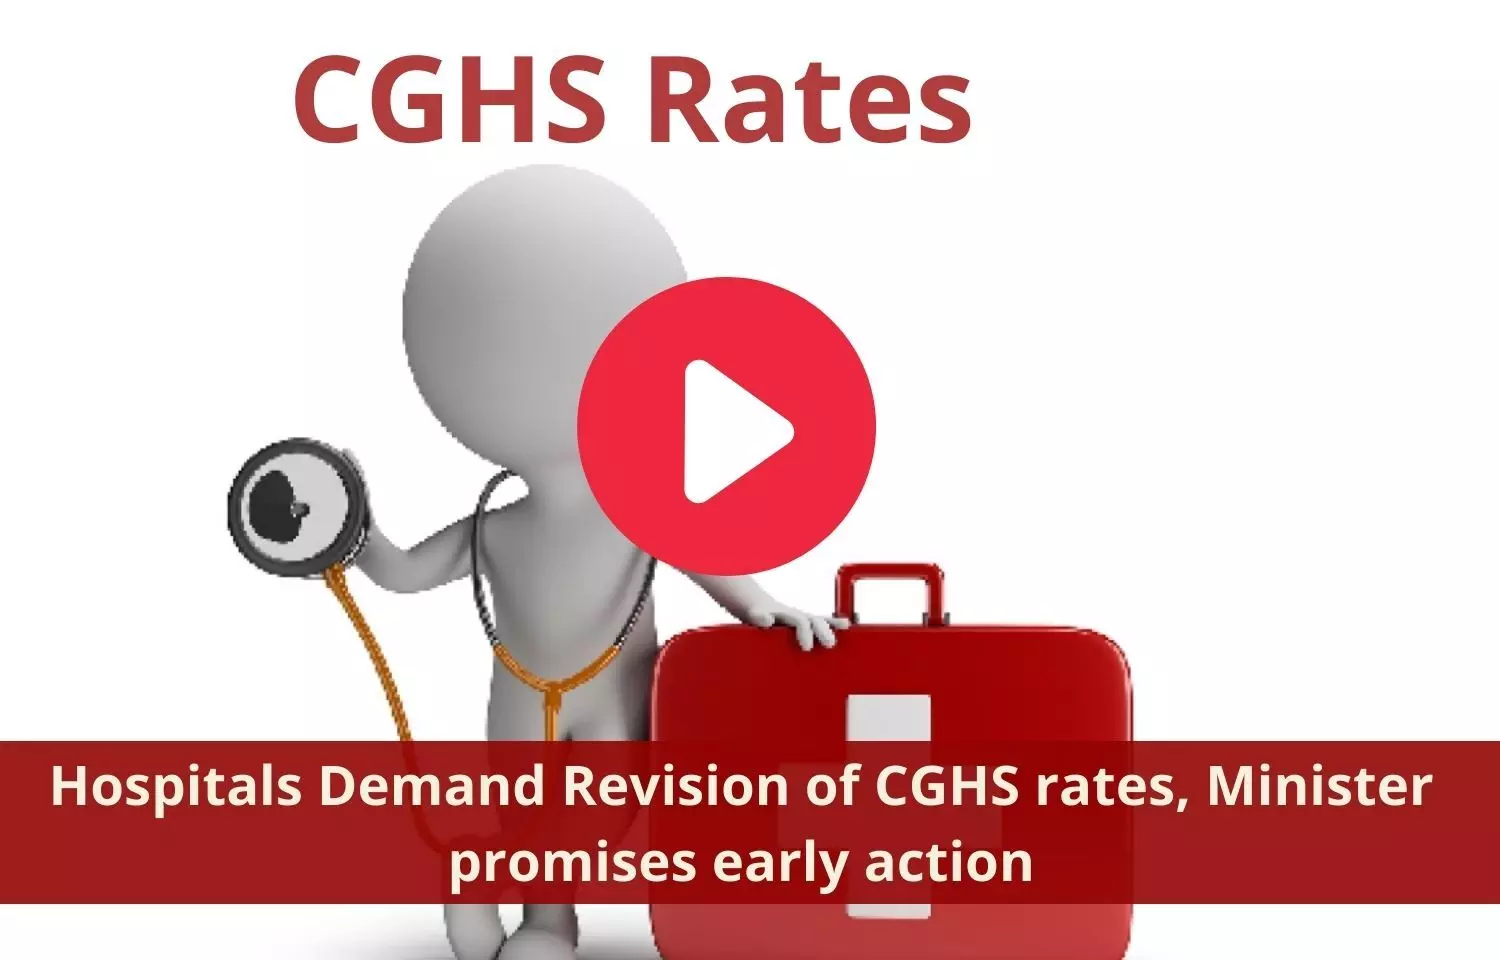 Demand for revision of CGHS rates exclate: Doctors meet Health Minister